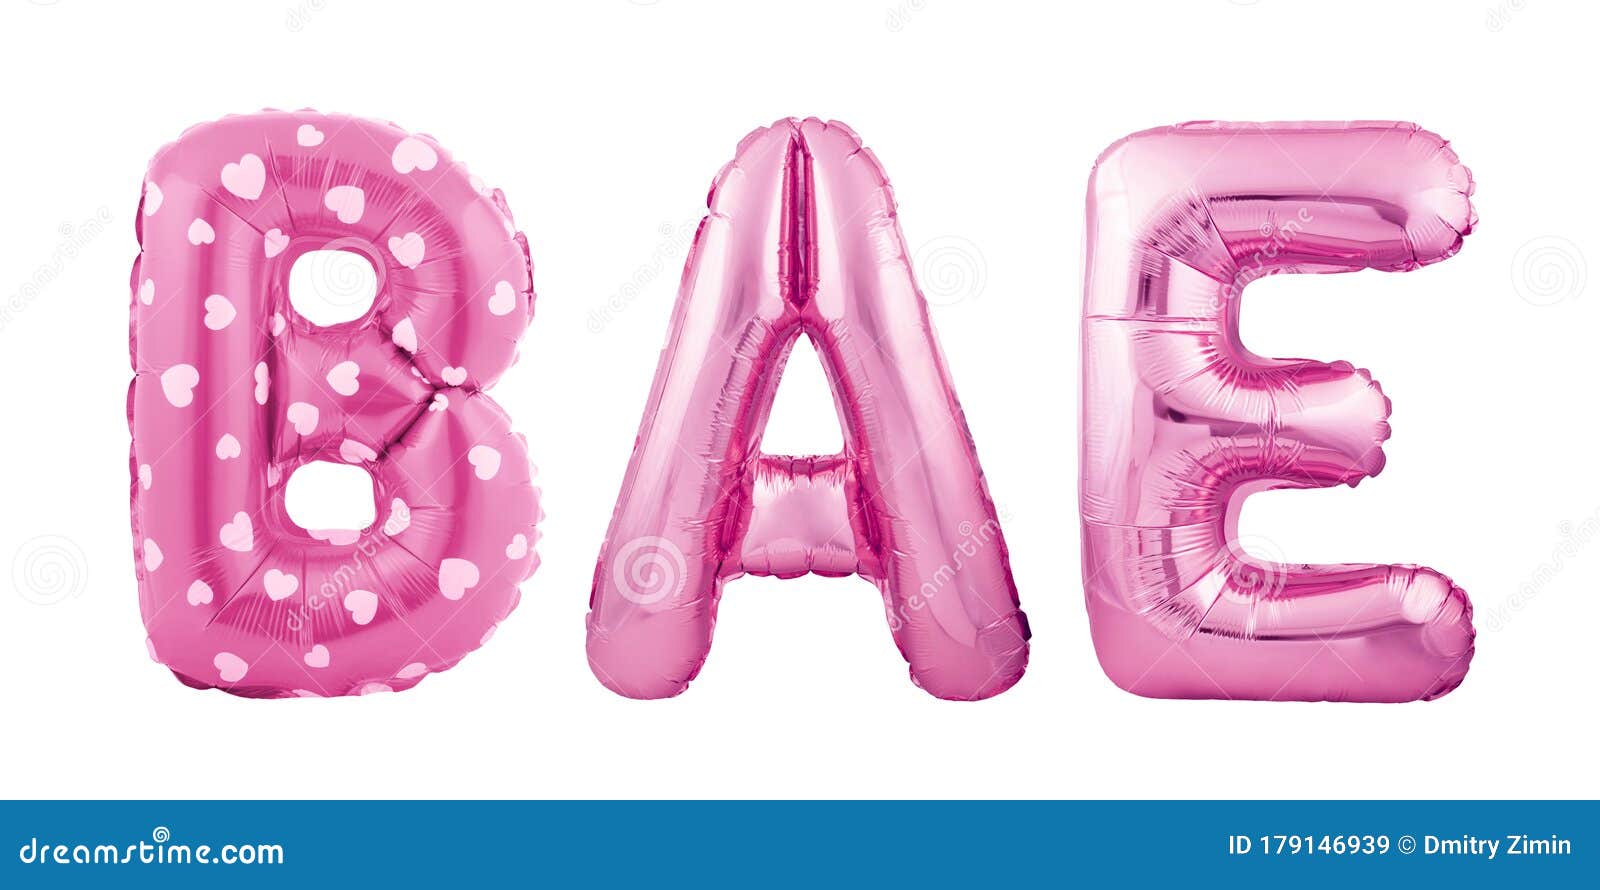 bae word made of pink inflatable balloons  on white background